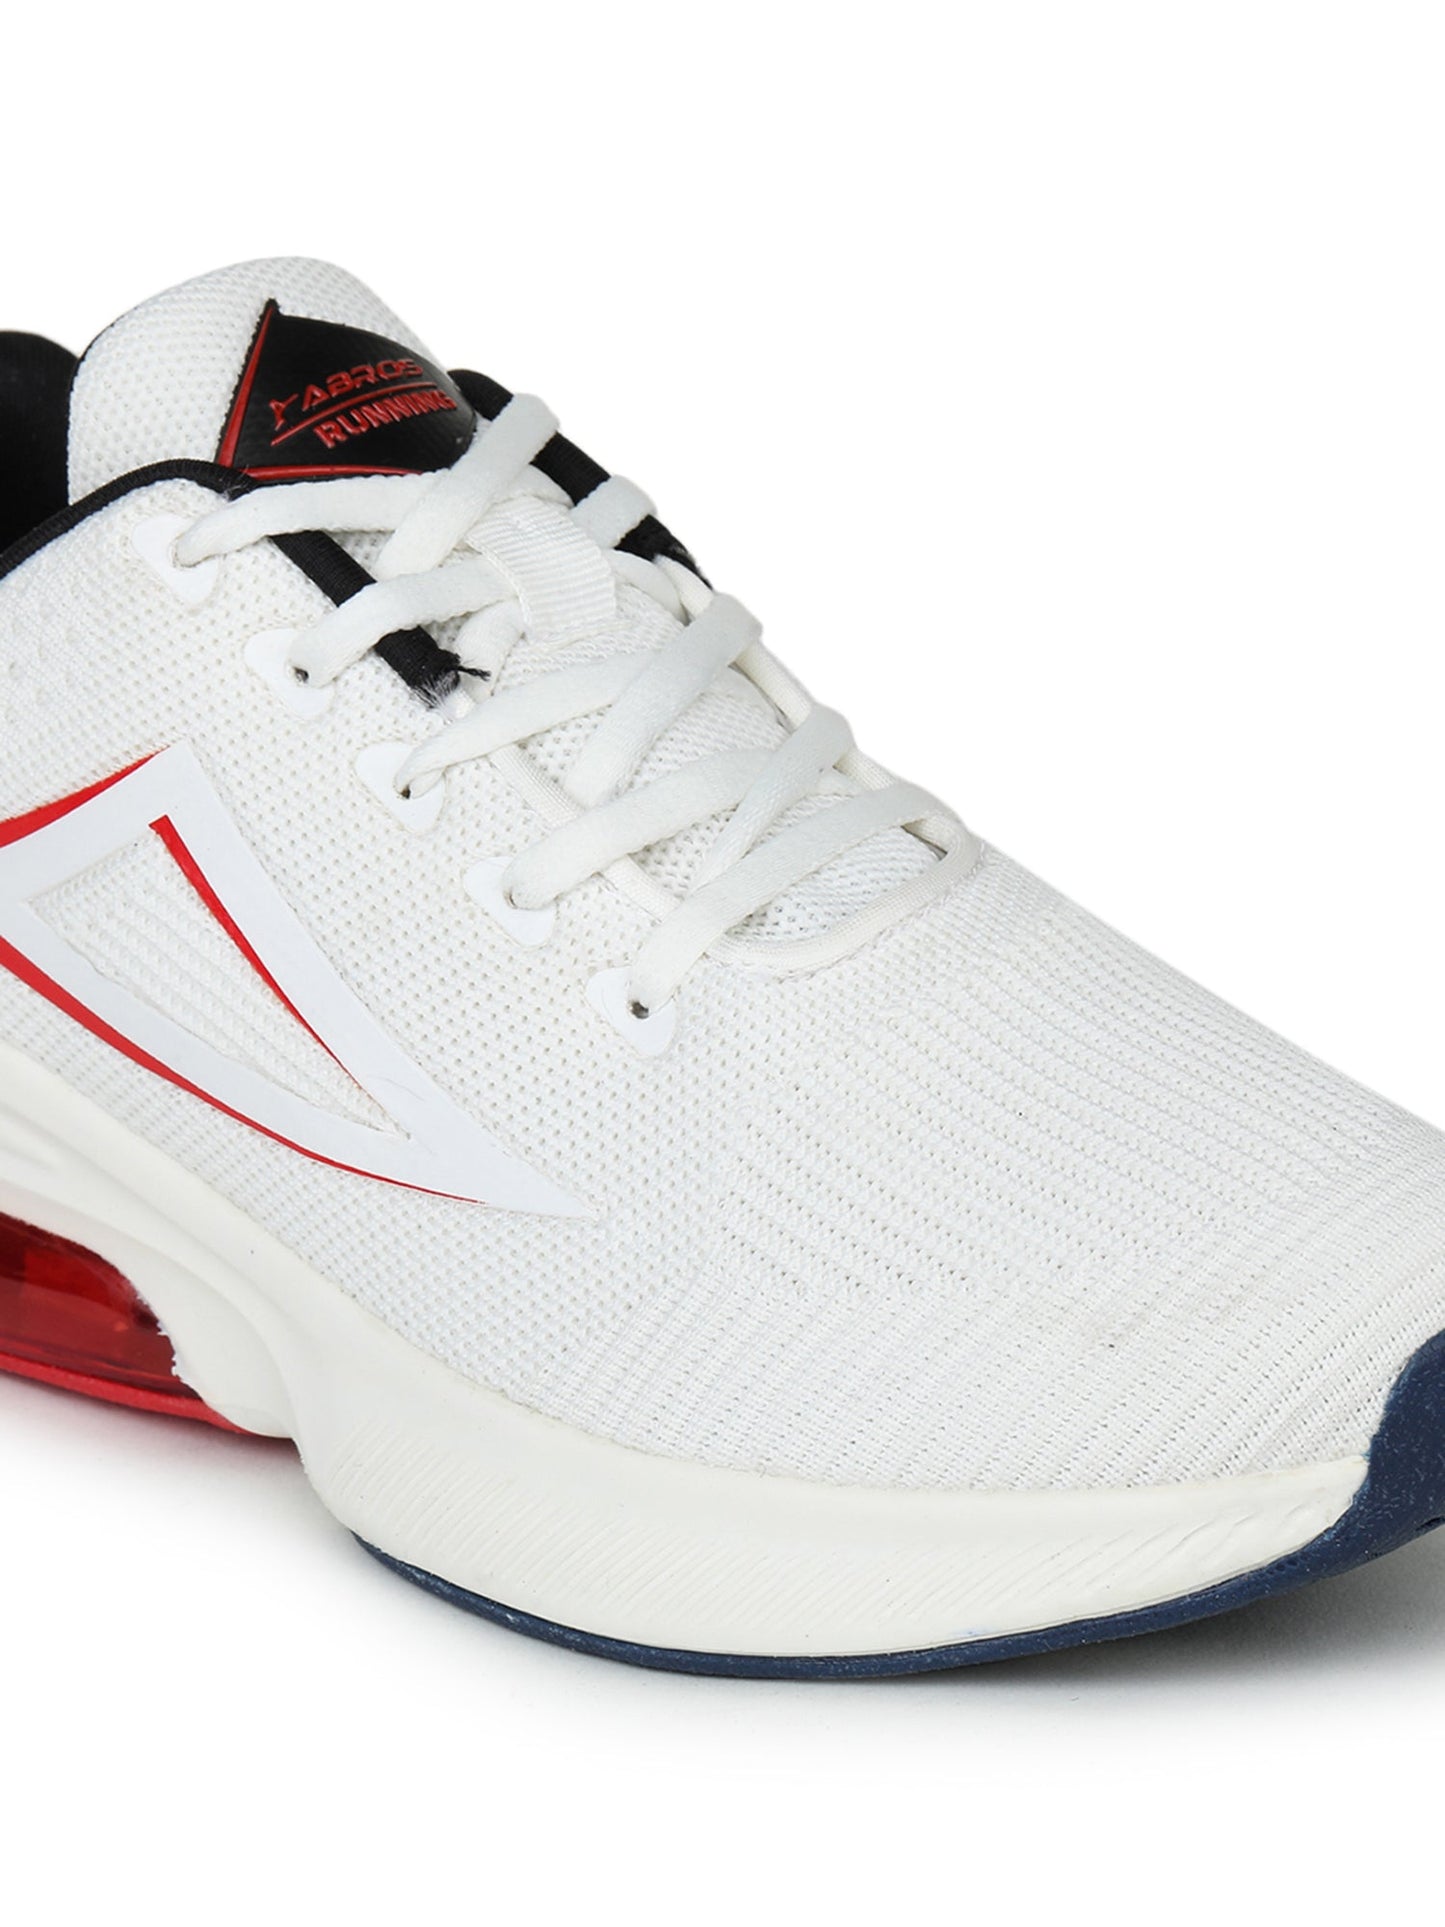 ABROS GALAXY-PRO SPORT-SHOES For MEN'S